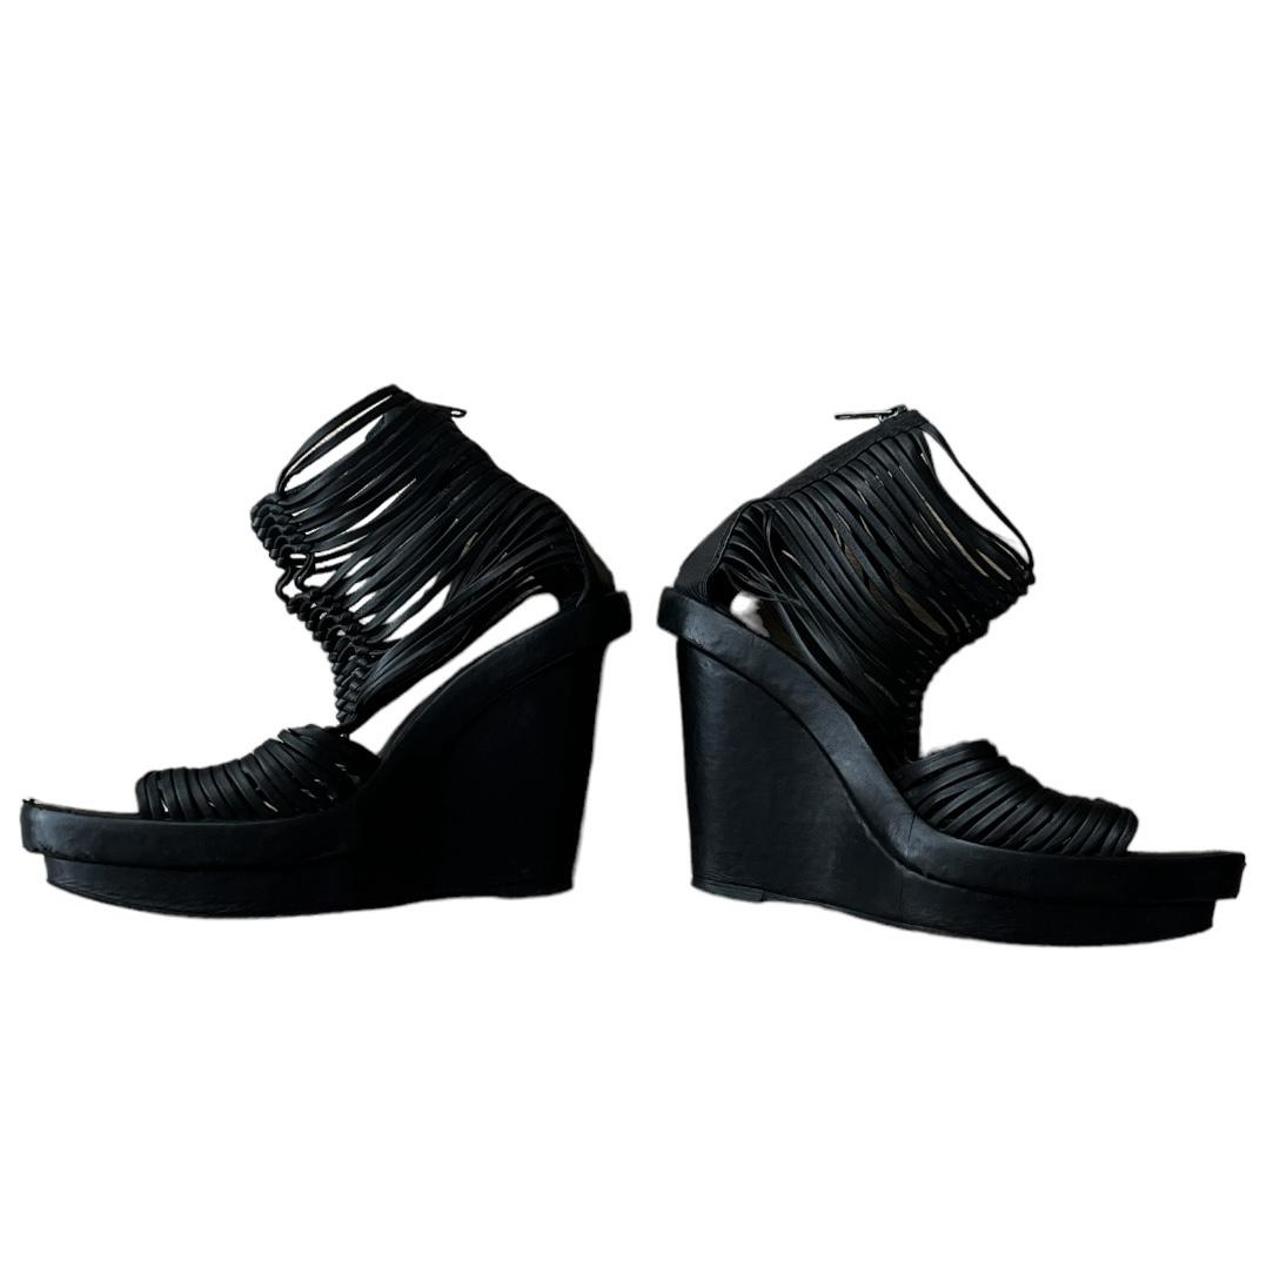 Product Image 3 - Ann Demeulemeester
Black multi-strap leather sandals